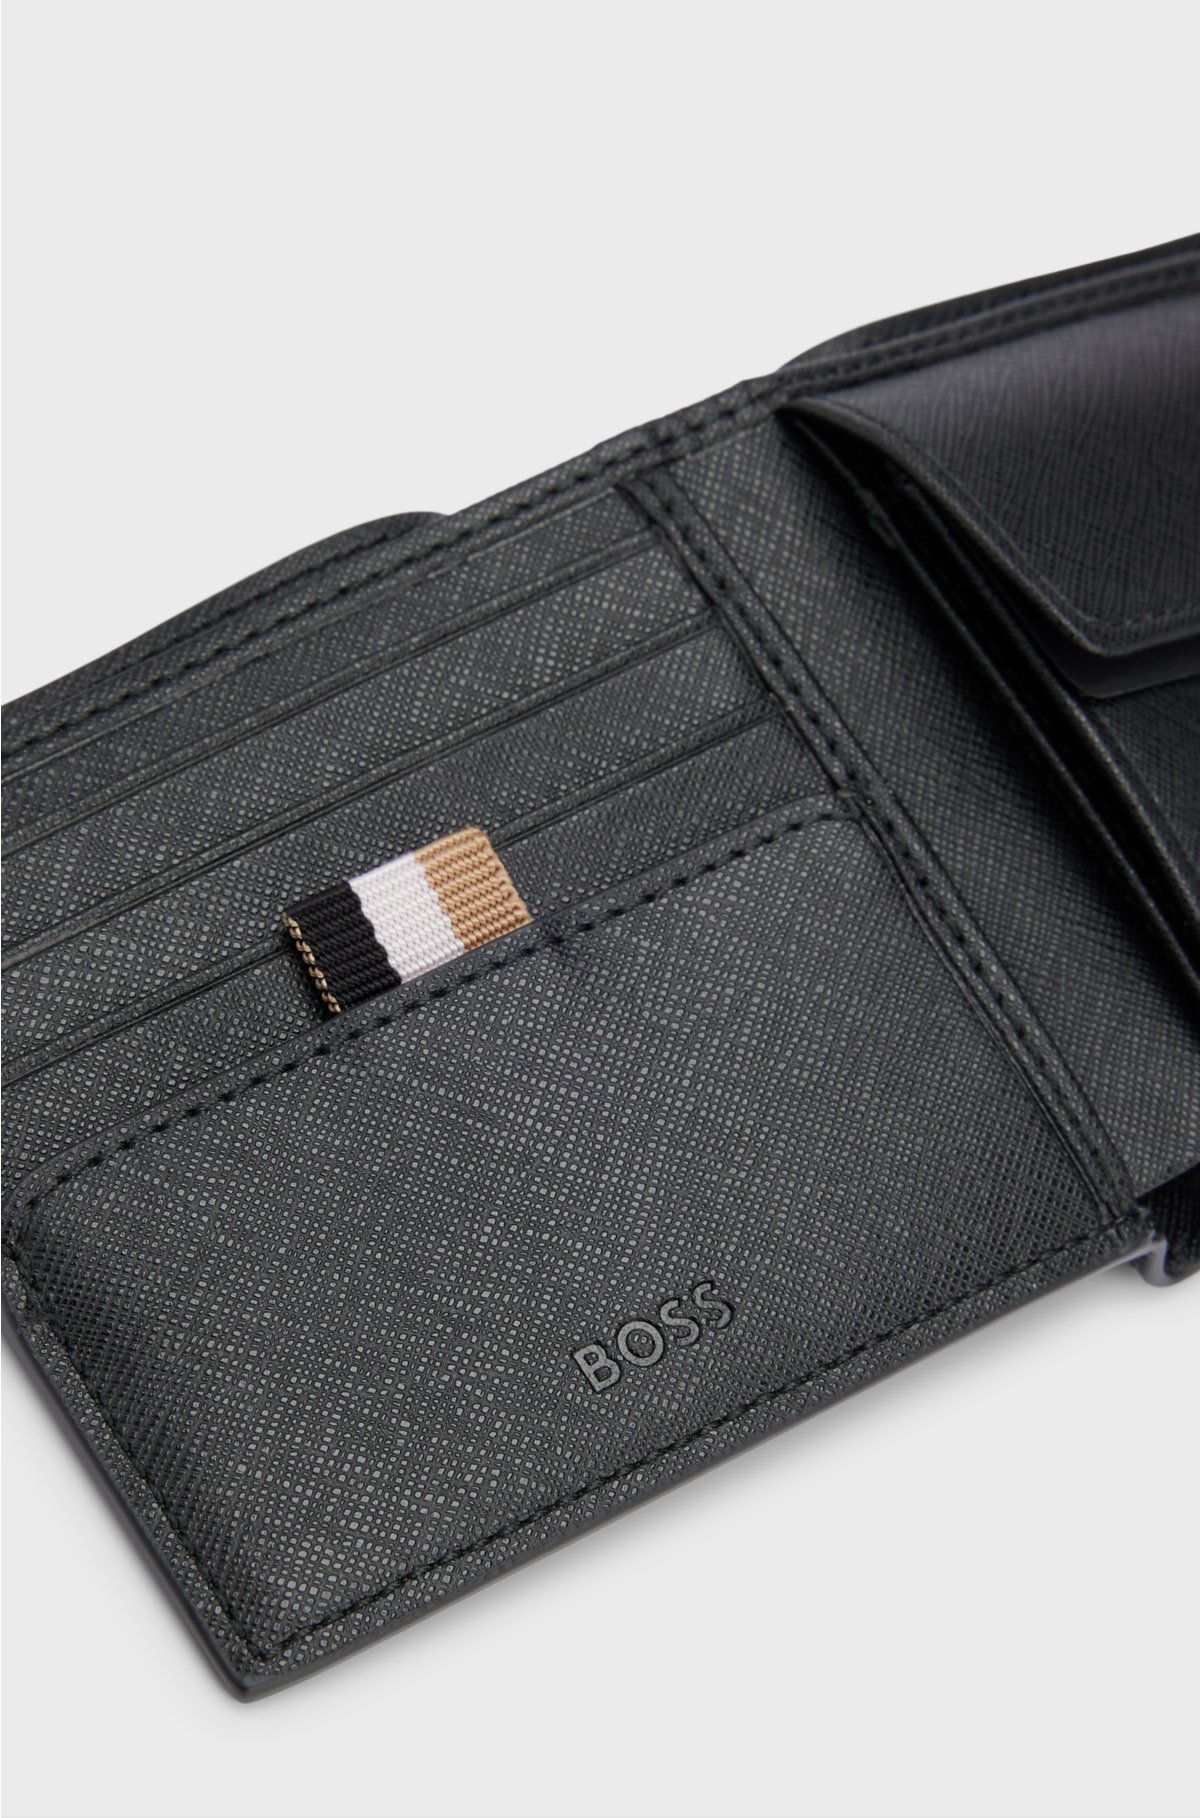 BOSS - Structured wallet with signature stripe and logo detail